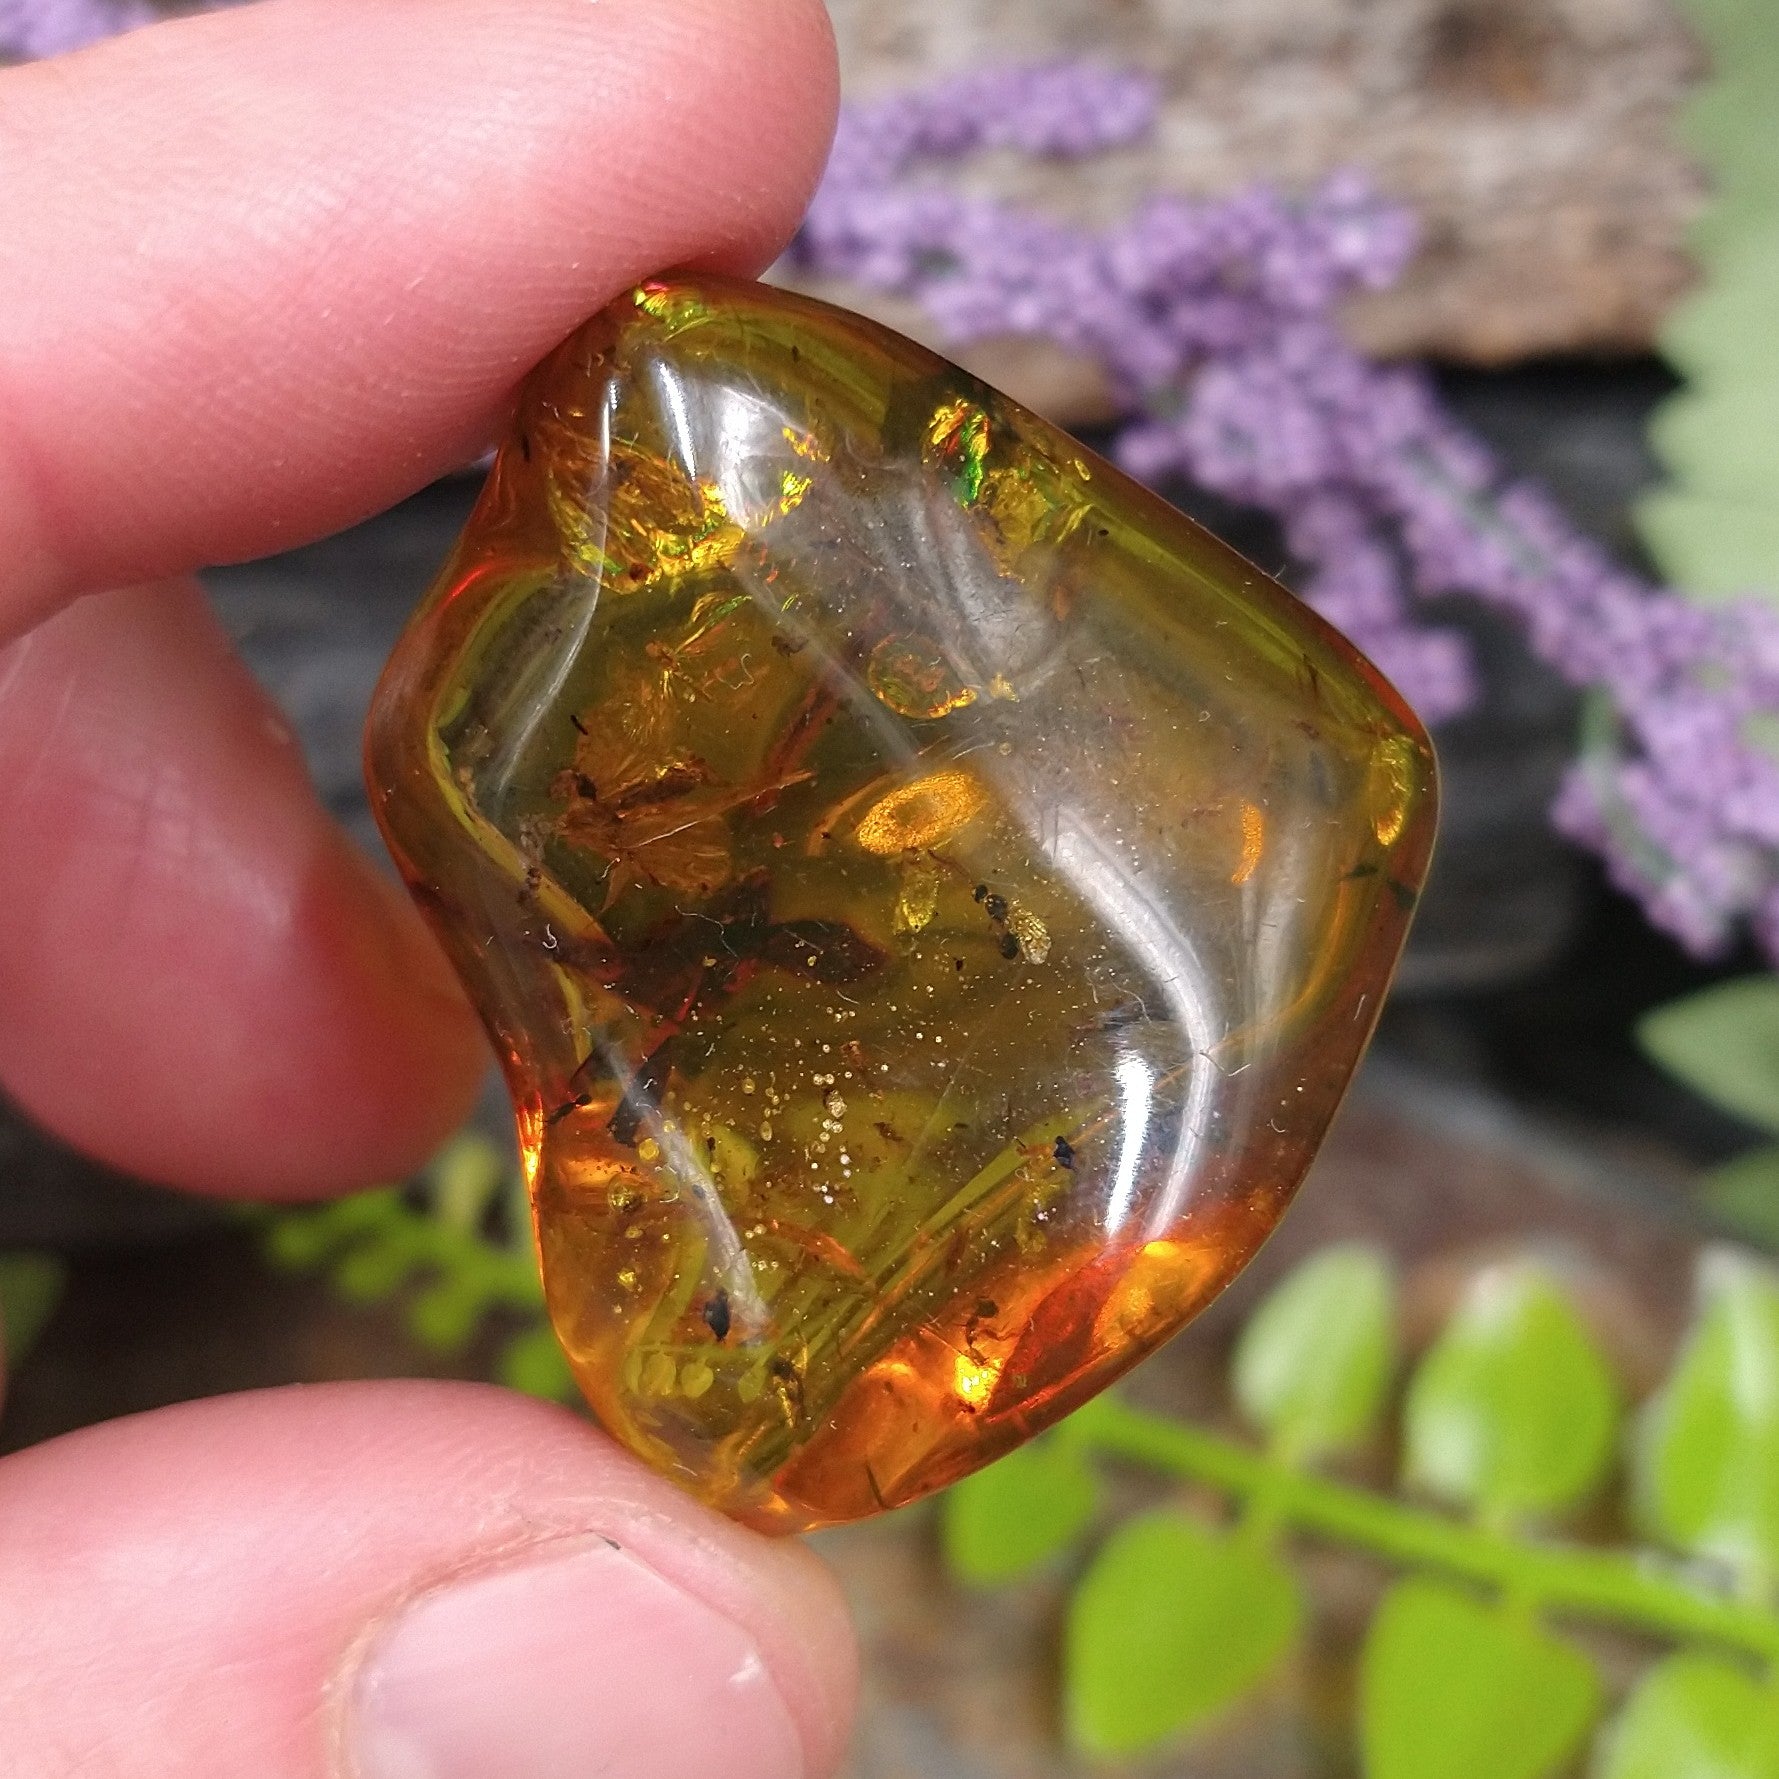 AMB-463 Chiapas Amber with Insects